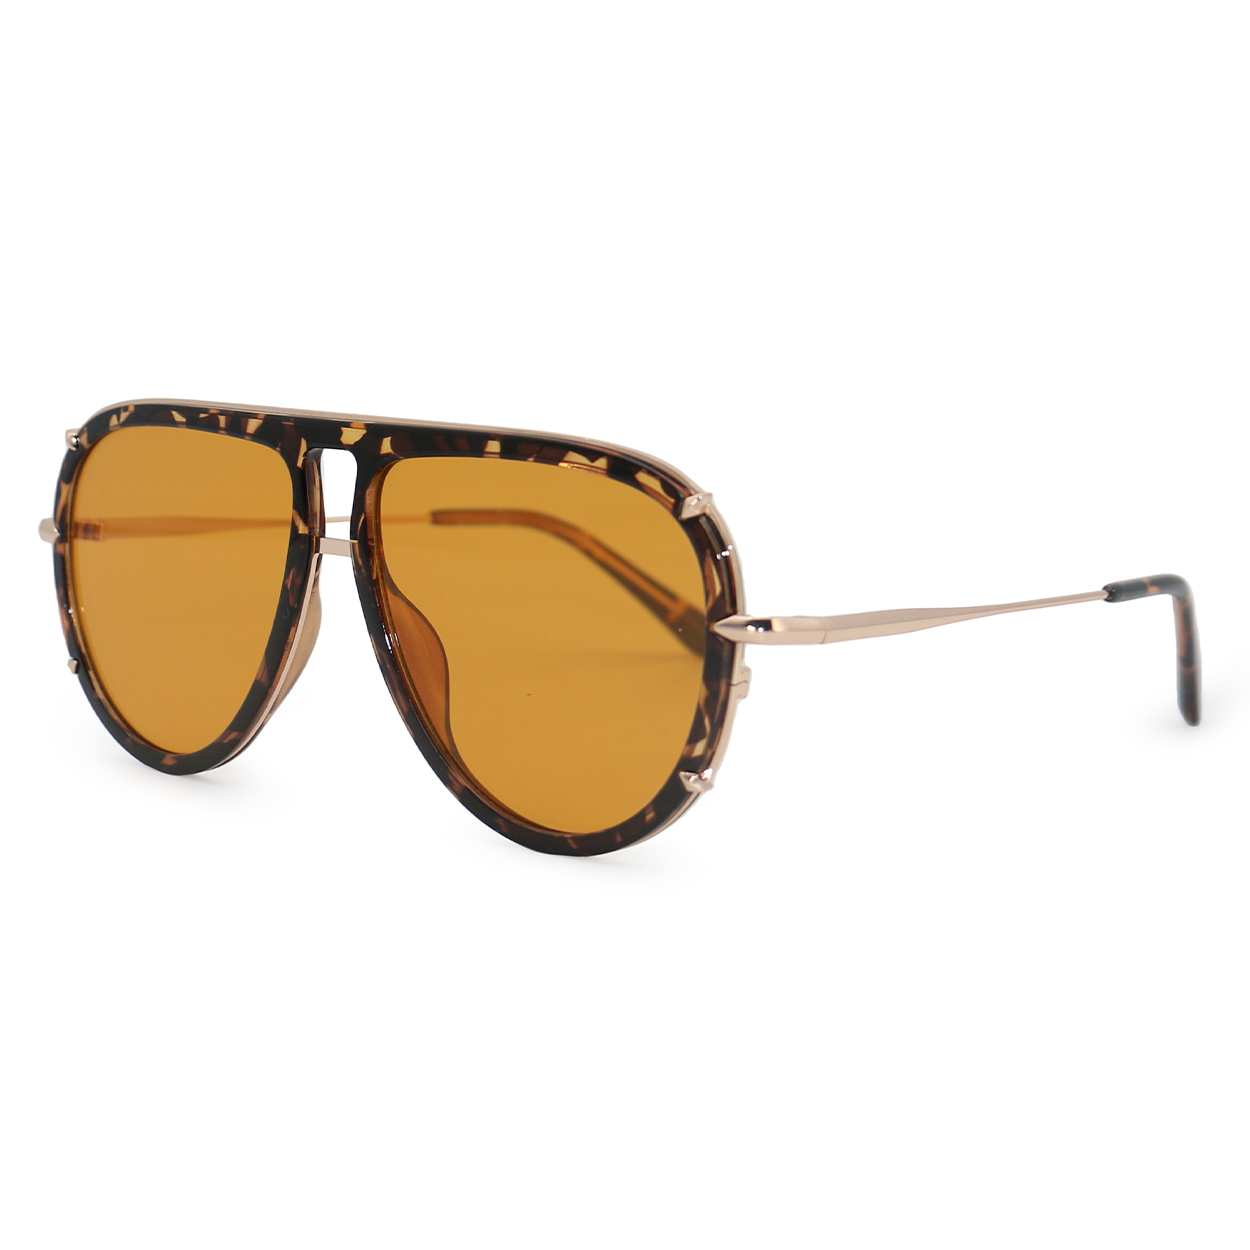 Tangle free Aviator Sunglasses - Oversized sustainable sunglasses for Women - Ivy Luxe Yellow - Side Details - TopFoxx